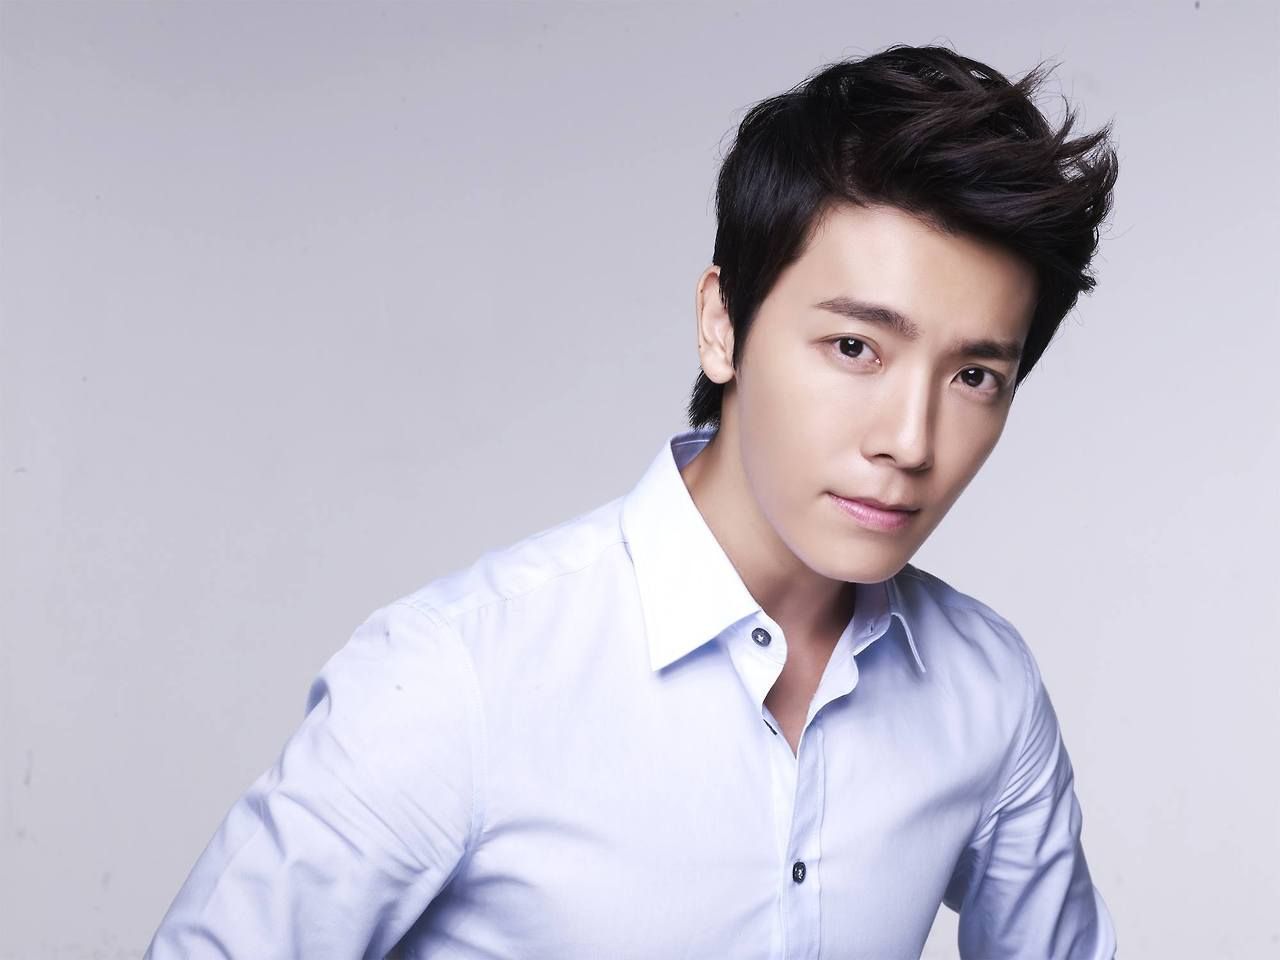 donghae wallpaper,hair,face,forehead,chin,hairstyle